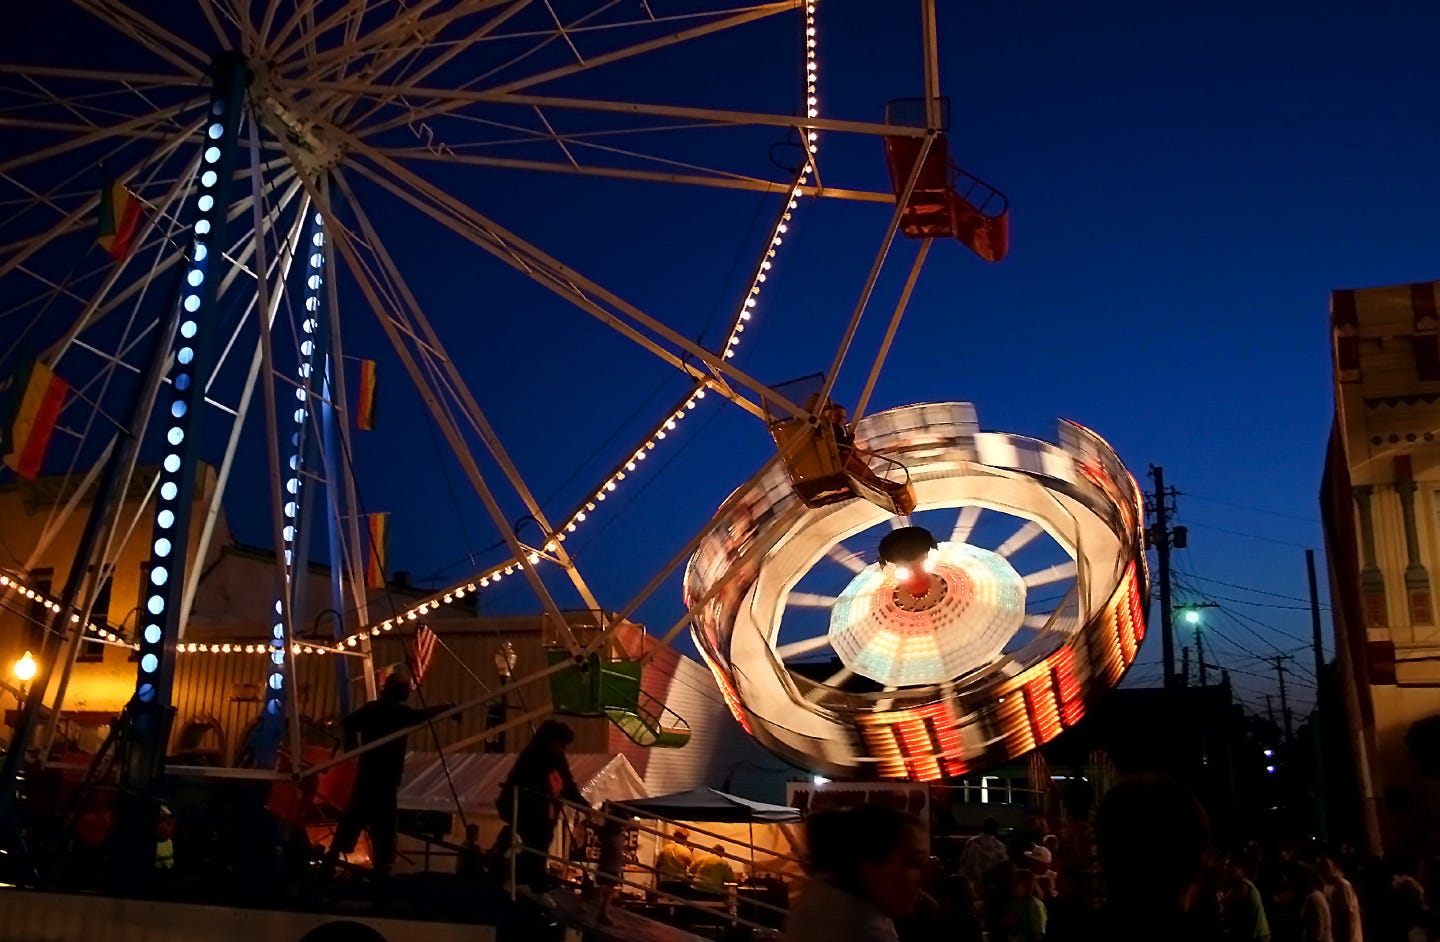 Each June, Knightstown hosts its Jubilee Days celebration, which features a carnival and parade. The summer night is punctuated by the midway’s thumping music and flashing lights. Many a wide-eyed kid circled the attractions, nibbling cotton candy while deciding which ride to try next. 